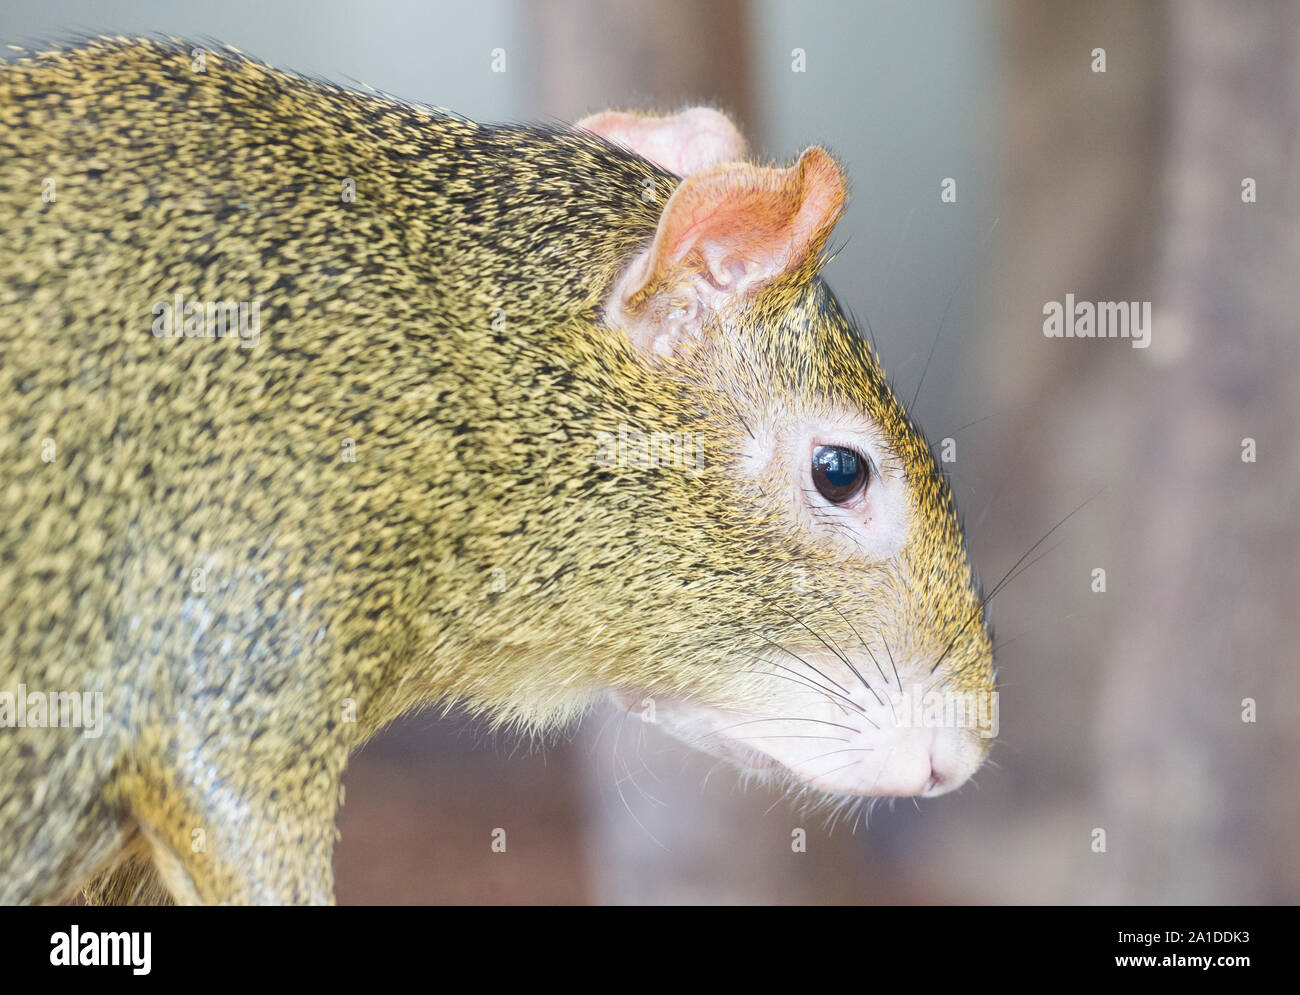 Agouti, aguti or common agouti, Dasyprocta, family of the Dasyproctidae, a rodent with brown fur Stock Photo